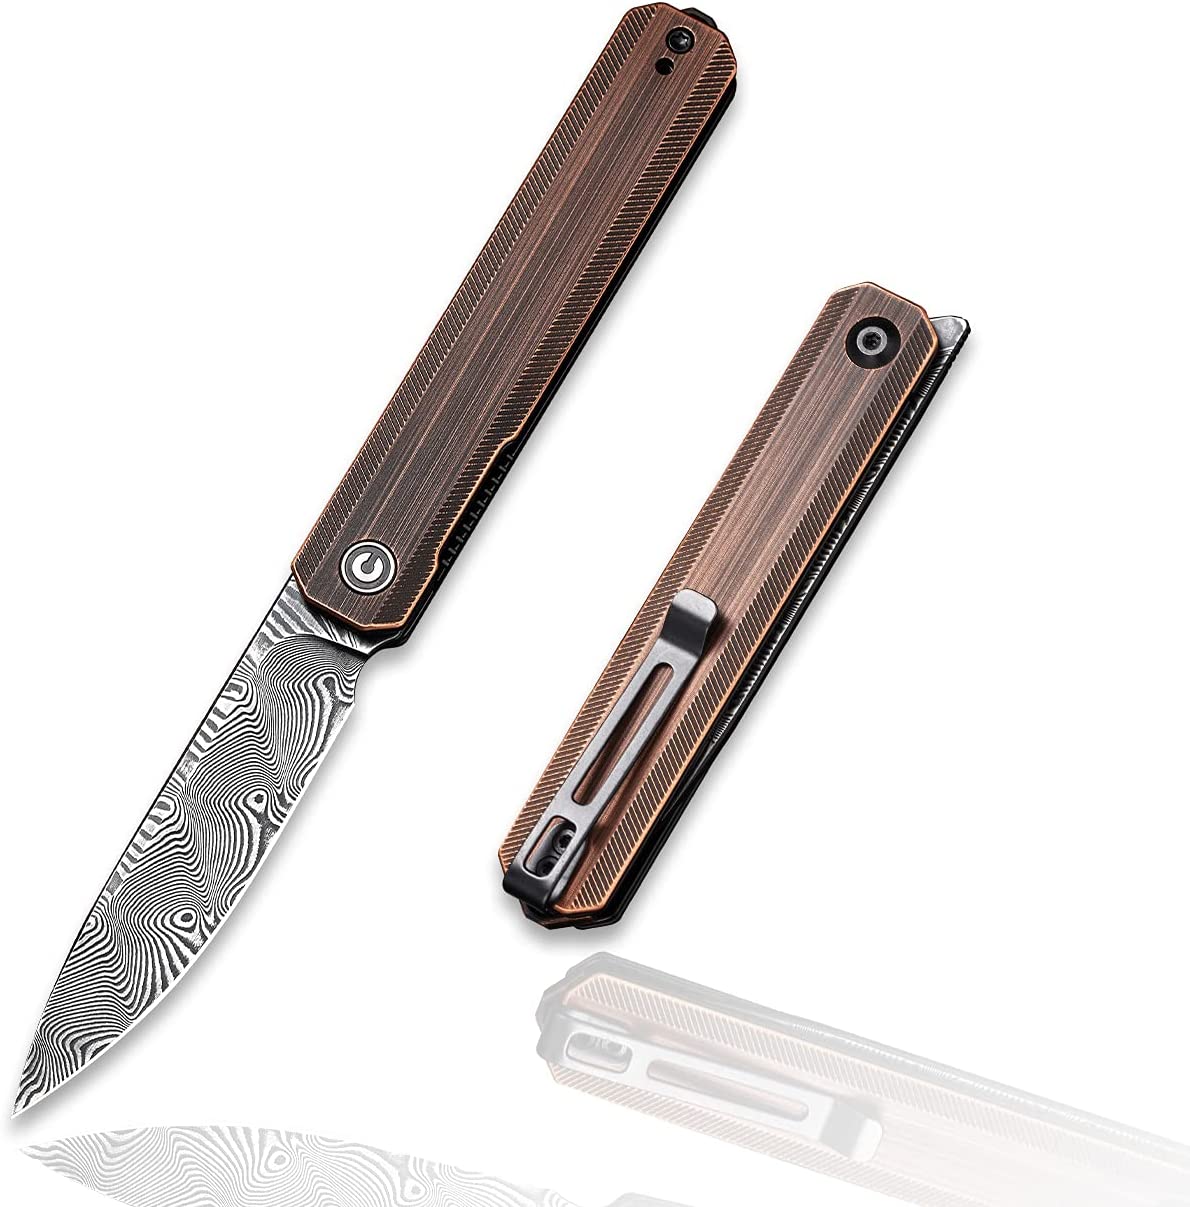 CIVIVI Exarch Damascus Pocket Knife, Front Flipper Small Folding Knife with 3.22 Inch Blade Copper Handle, Deep Carry Pocket Clip Outdoor Knife for Men C2003DS-2